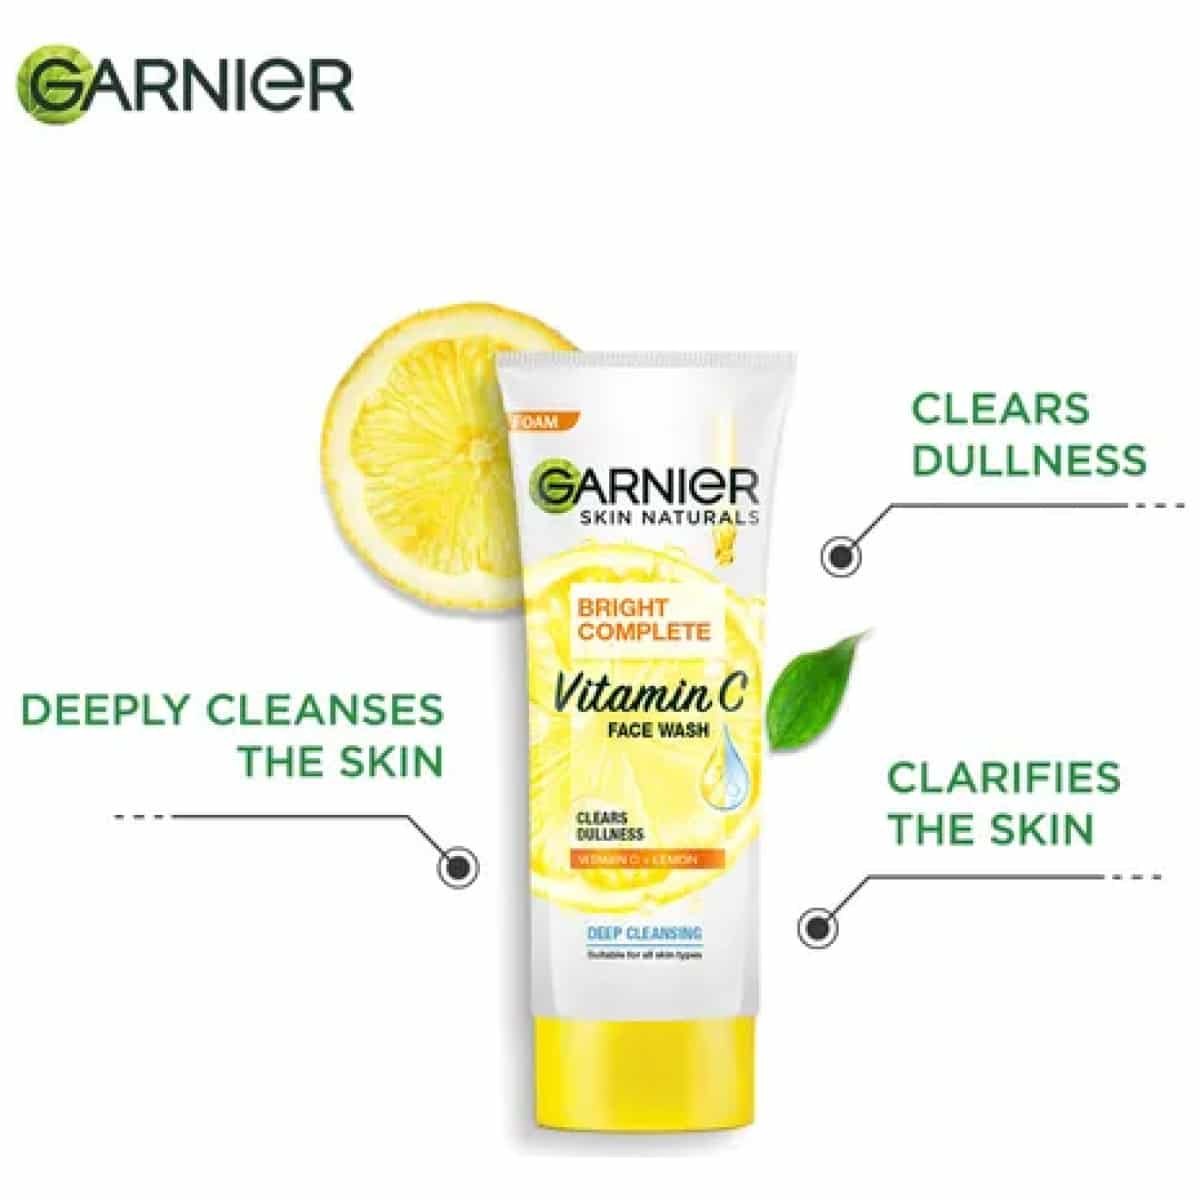 Garnier Bright Complete Vitamin C Face Wash With Lemon Extracts Fights Dullness 50g